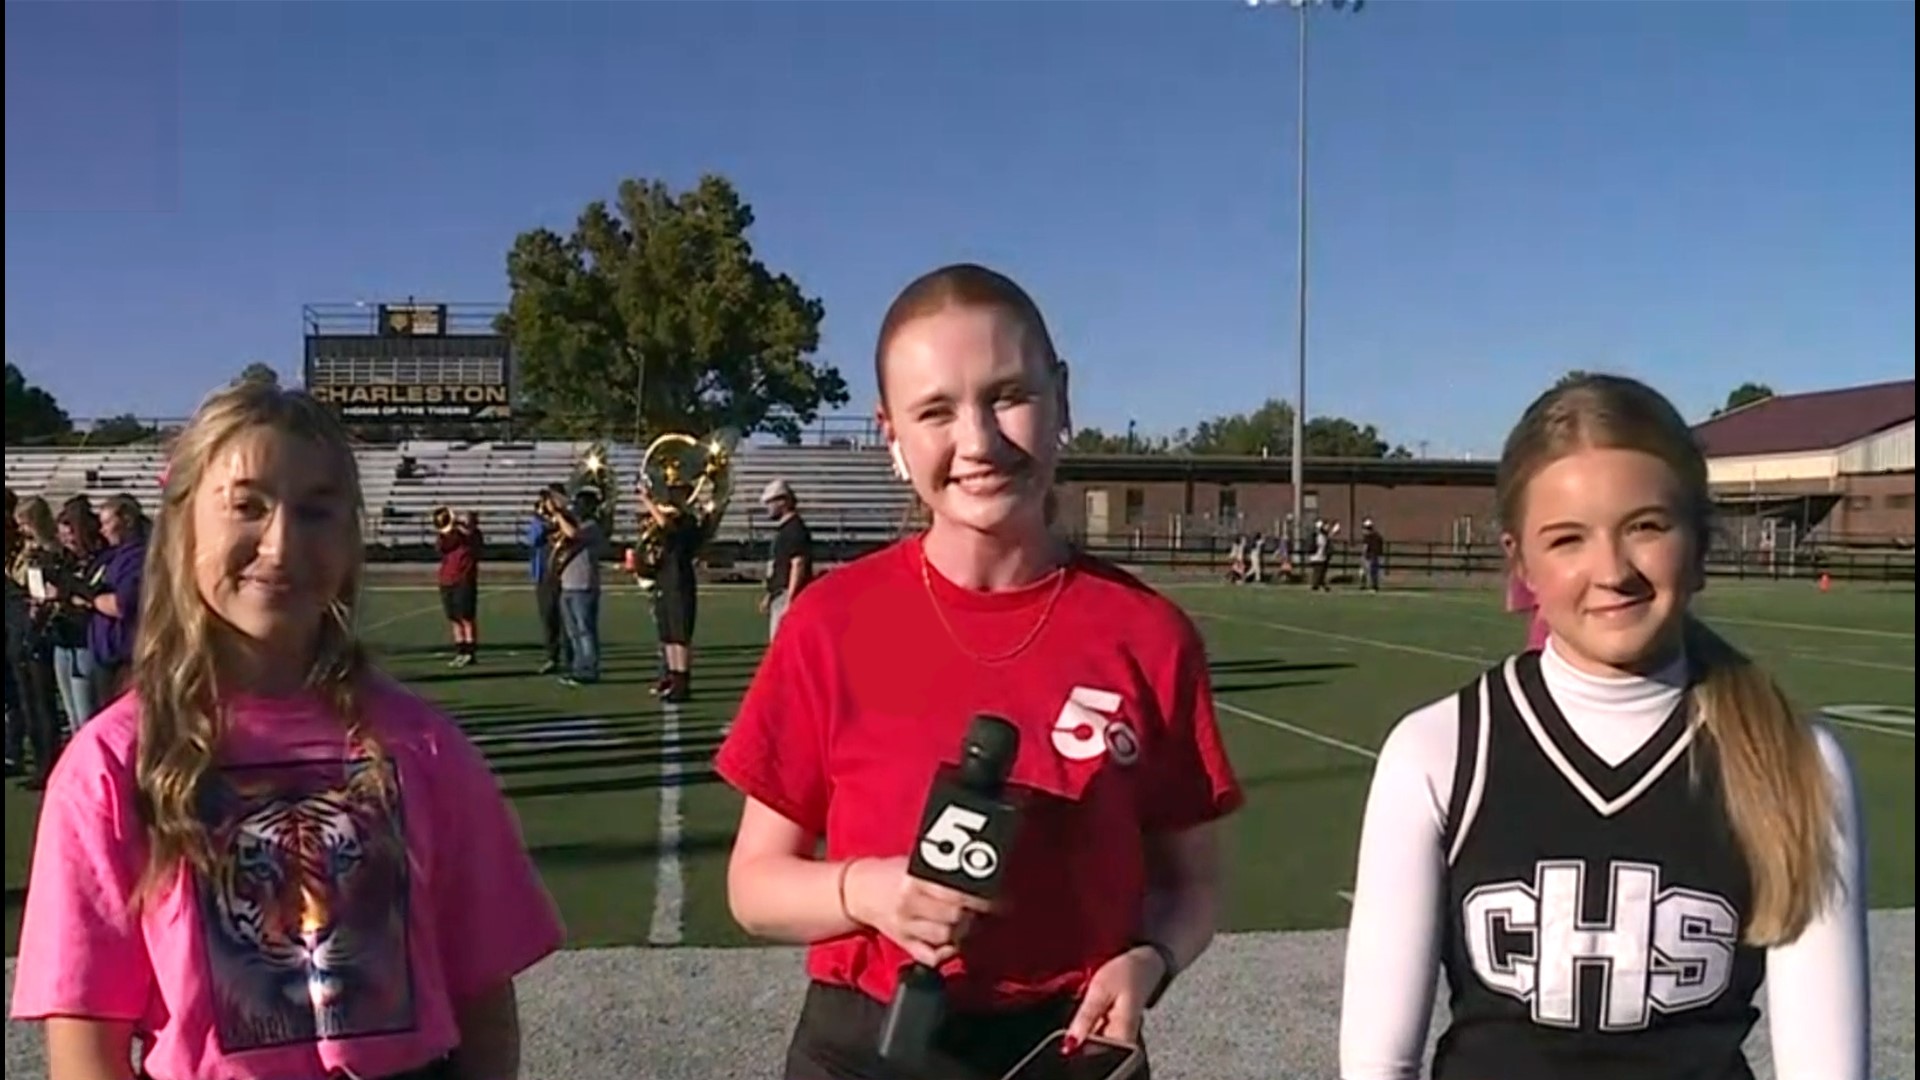 5NEWS reporter Lauren Spencer is live in Charleston where they will take on Booneville.